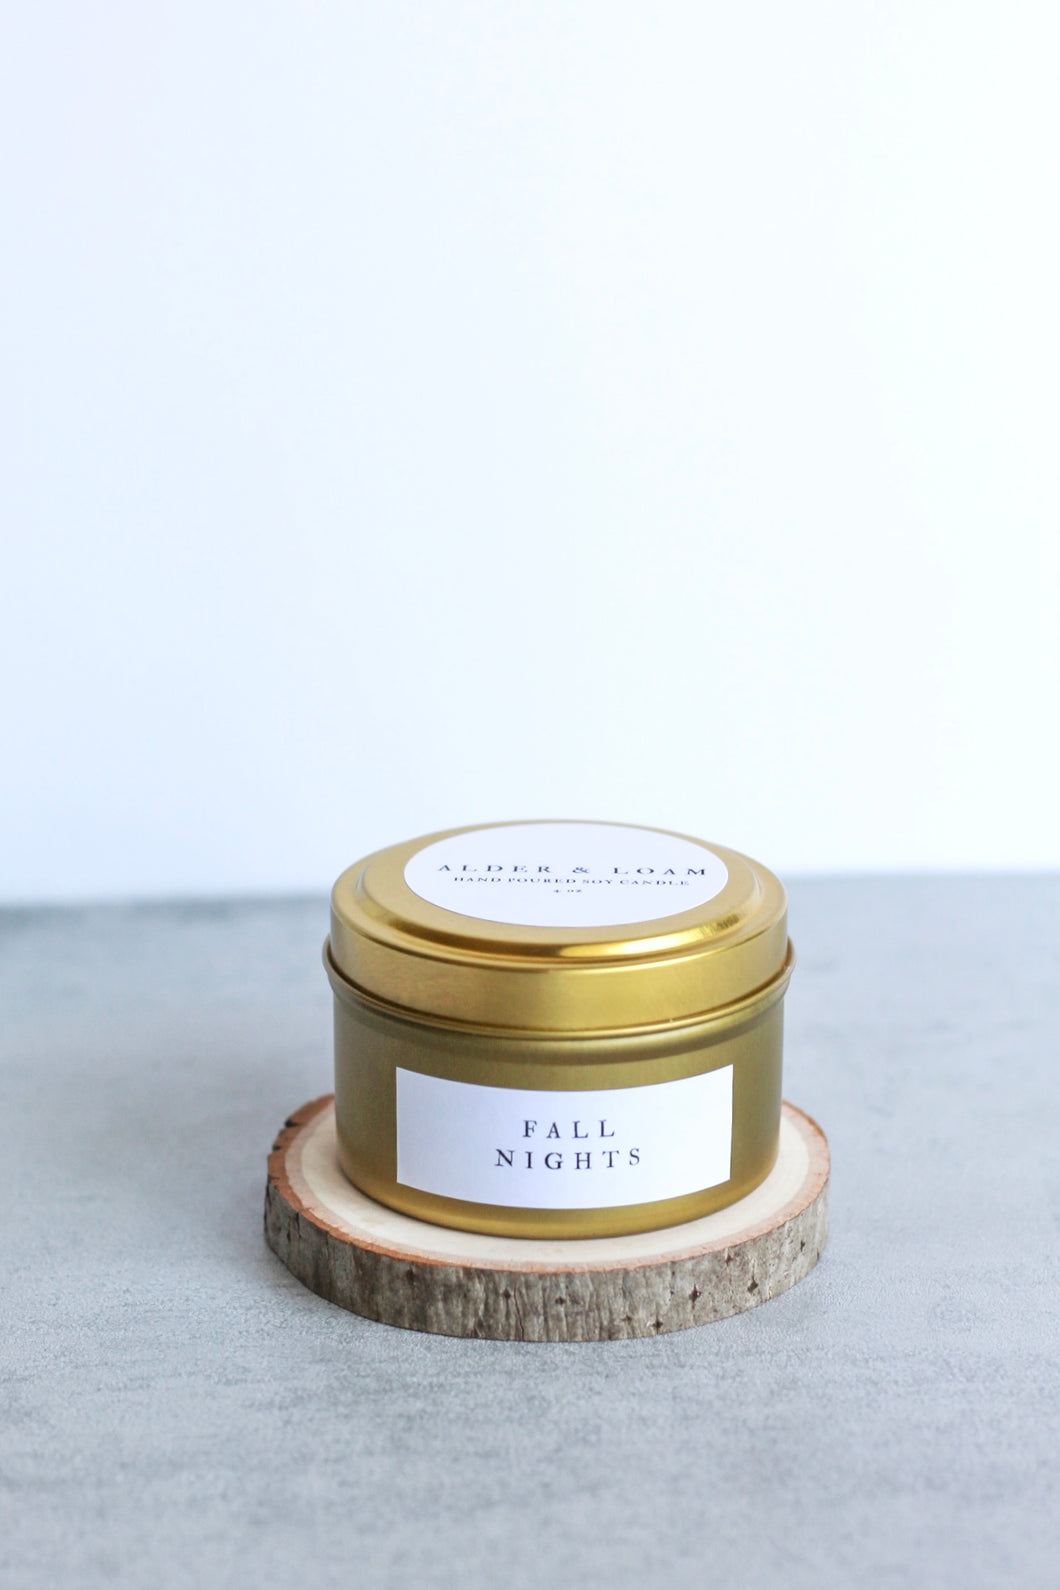 Fall Nights Soy Candle, Hand Poured, Natural, Eco Friendly, Earthy Scent, Fall Candle, 4 oz Tin